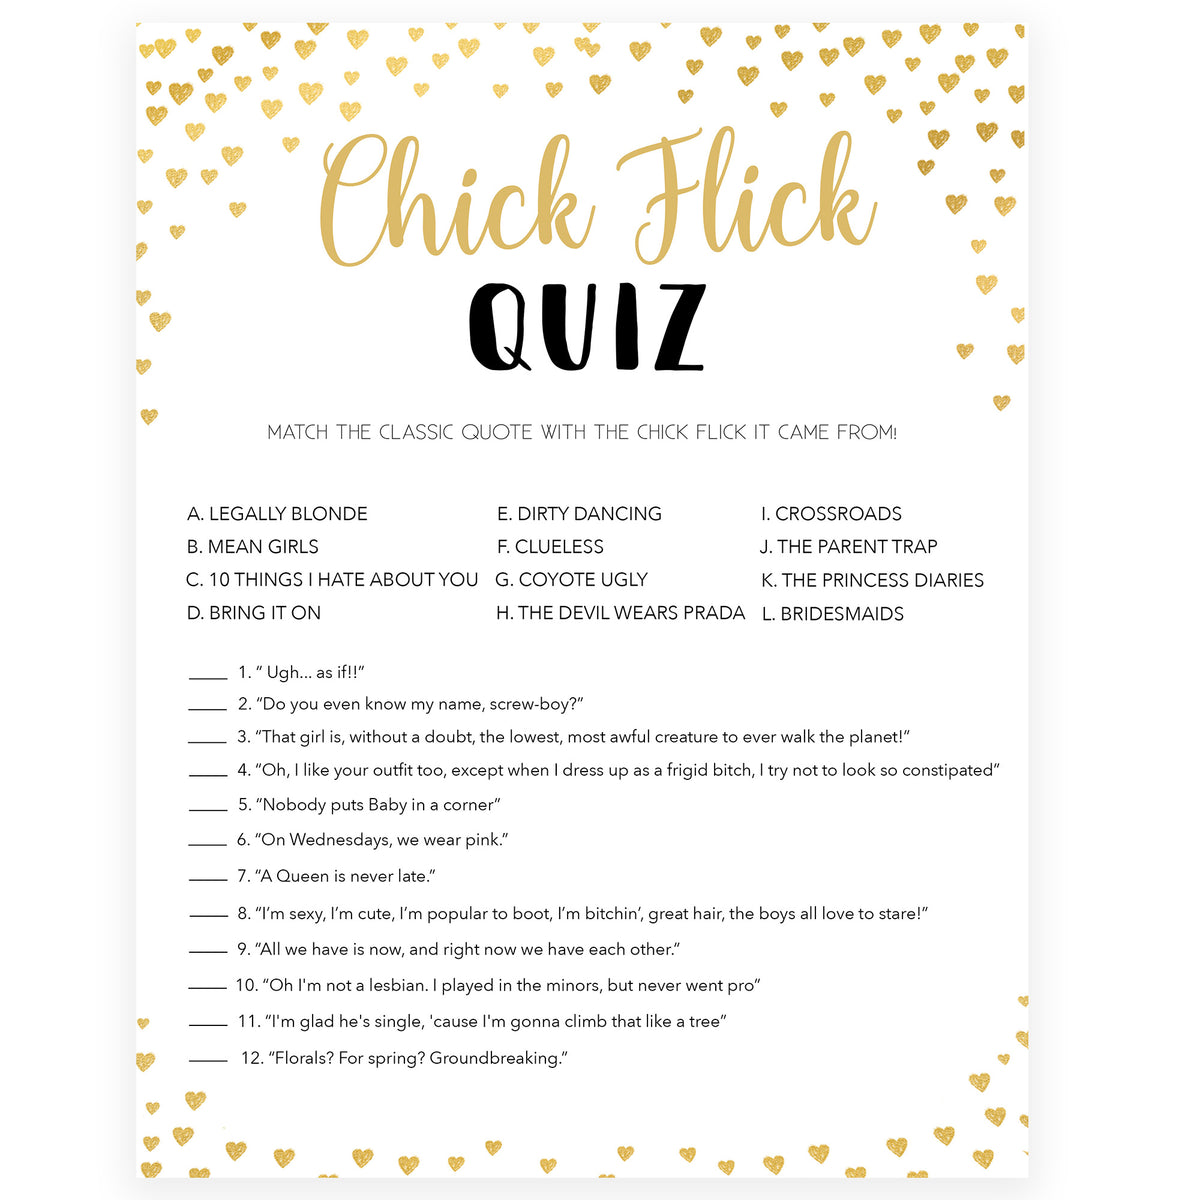 Gold hearts bachelorette games, chick flick quiz game, printable bachelorette games, hen party games, top party games, fun bridal shower games, bachelorette party games